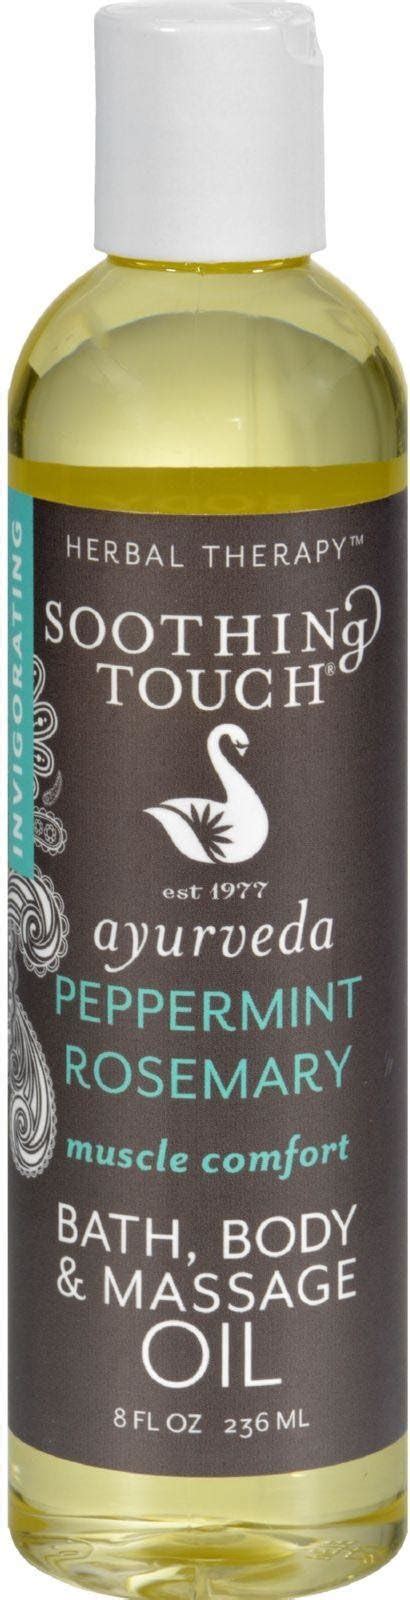 Soothing Touch Bath Body Massage Oil Muscle Comfort 8 Fl